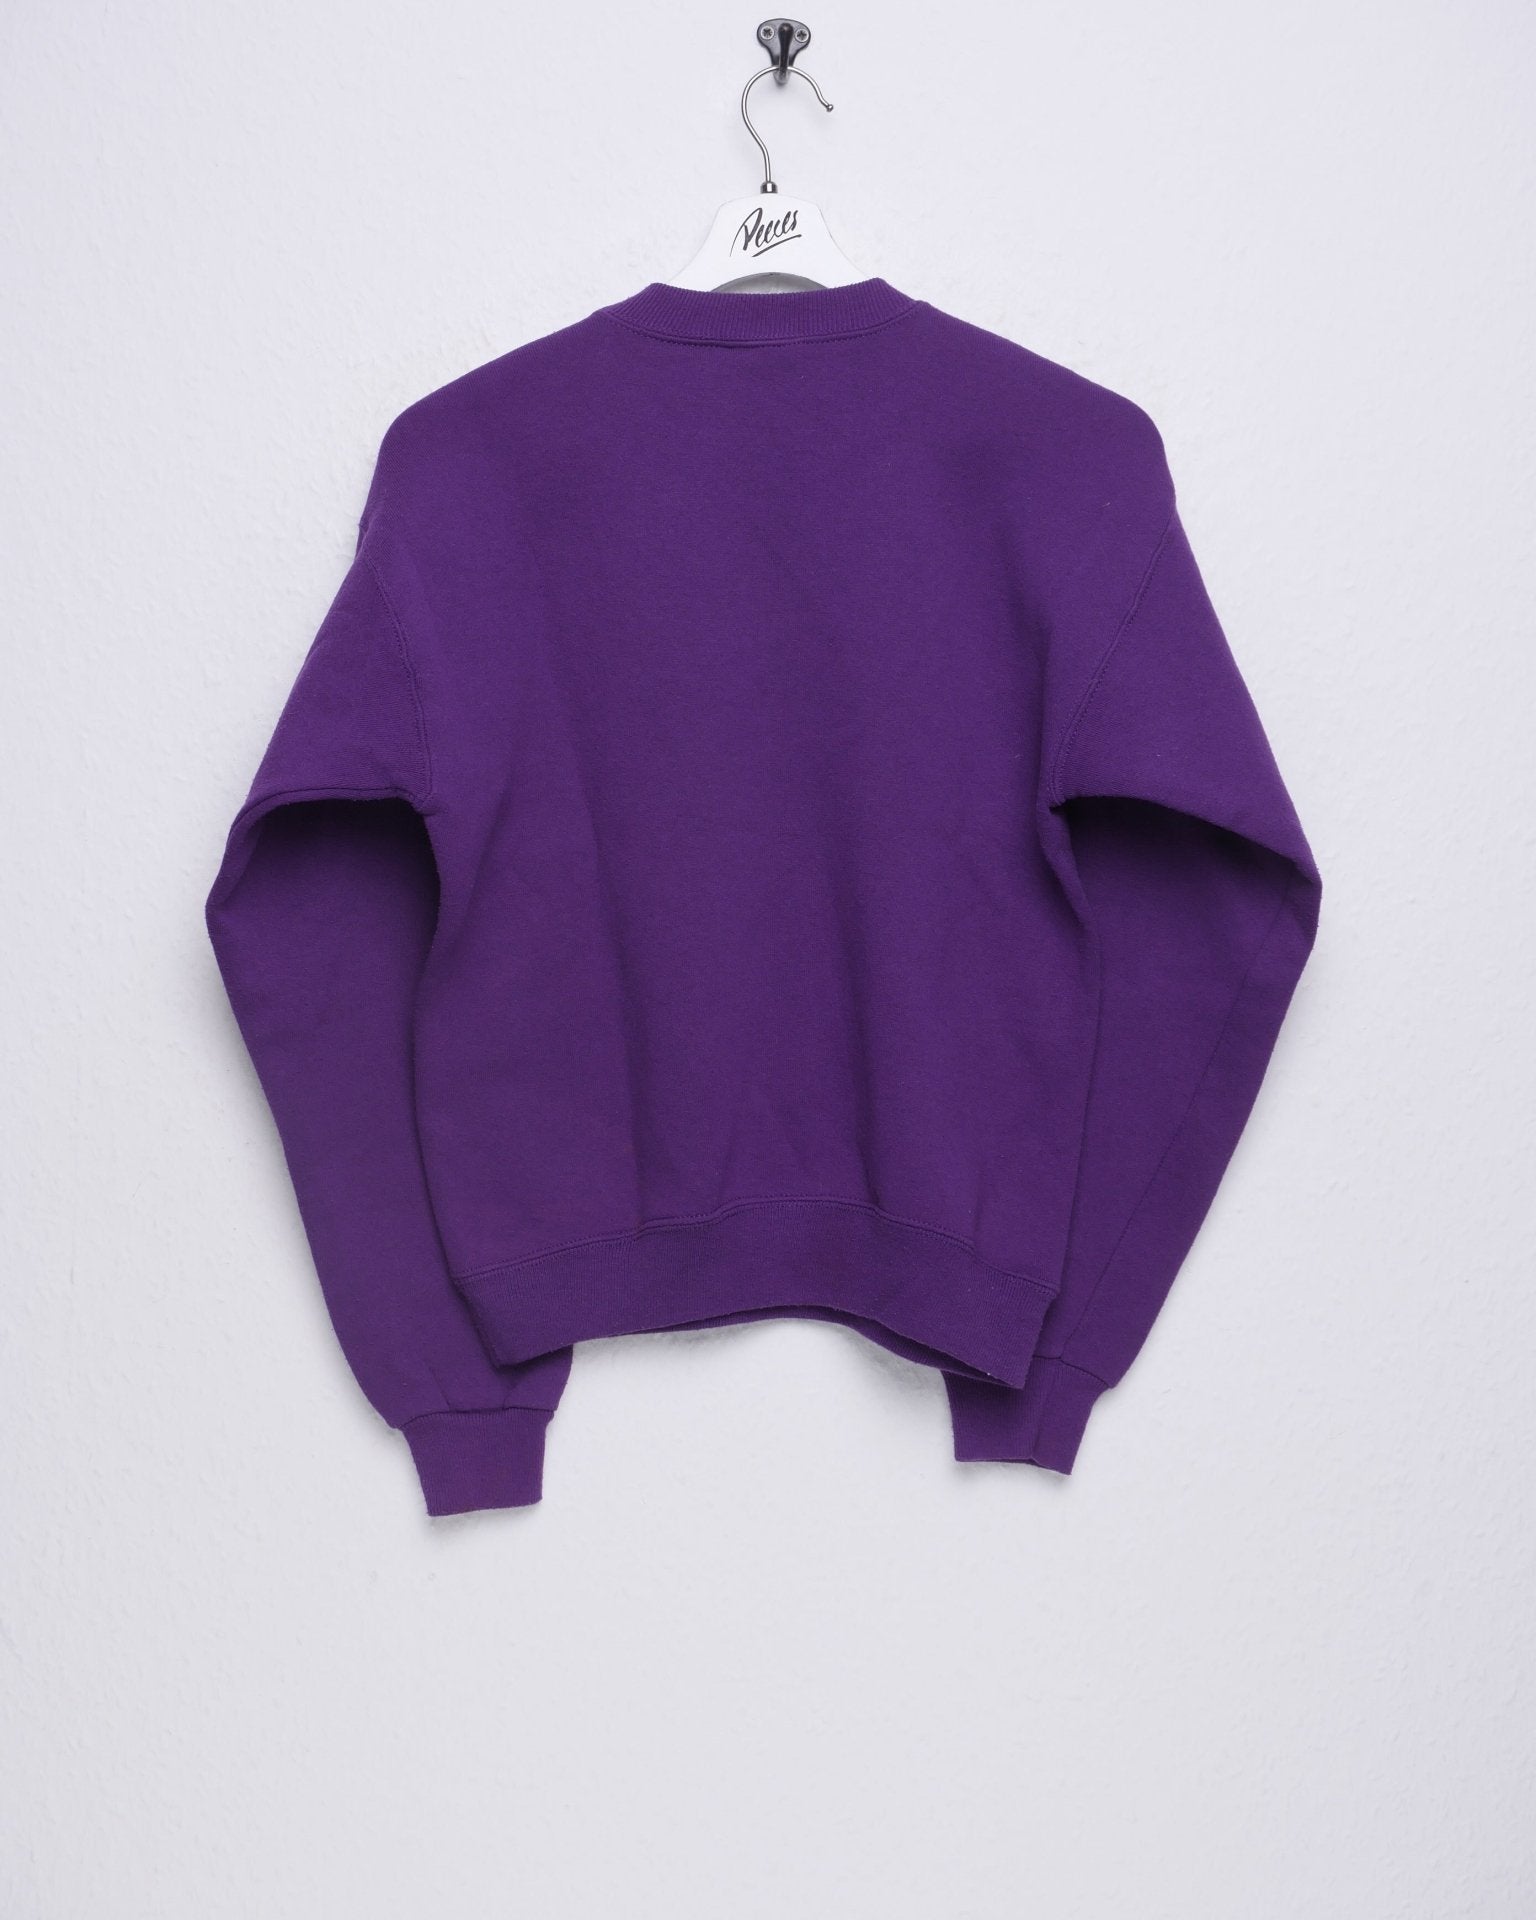 Boston embroidered Spellout purple Sweater - Peeces